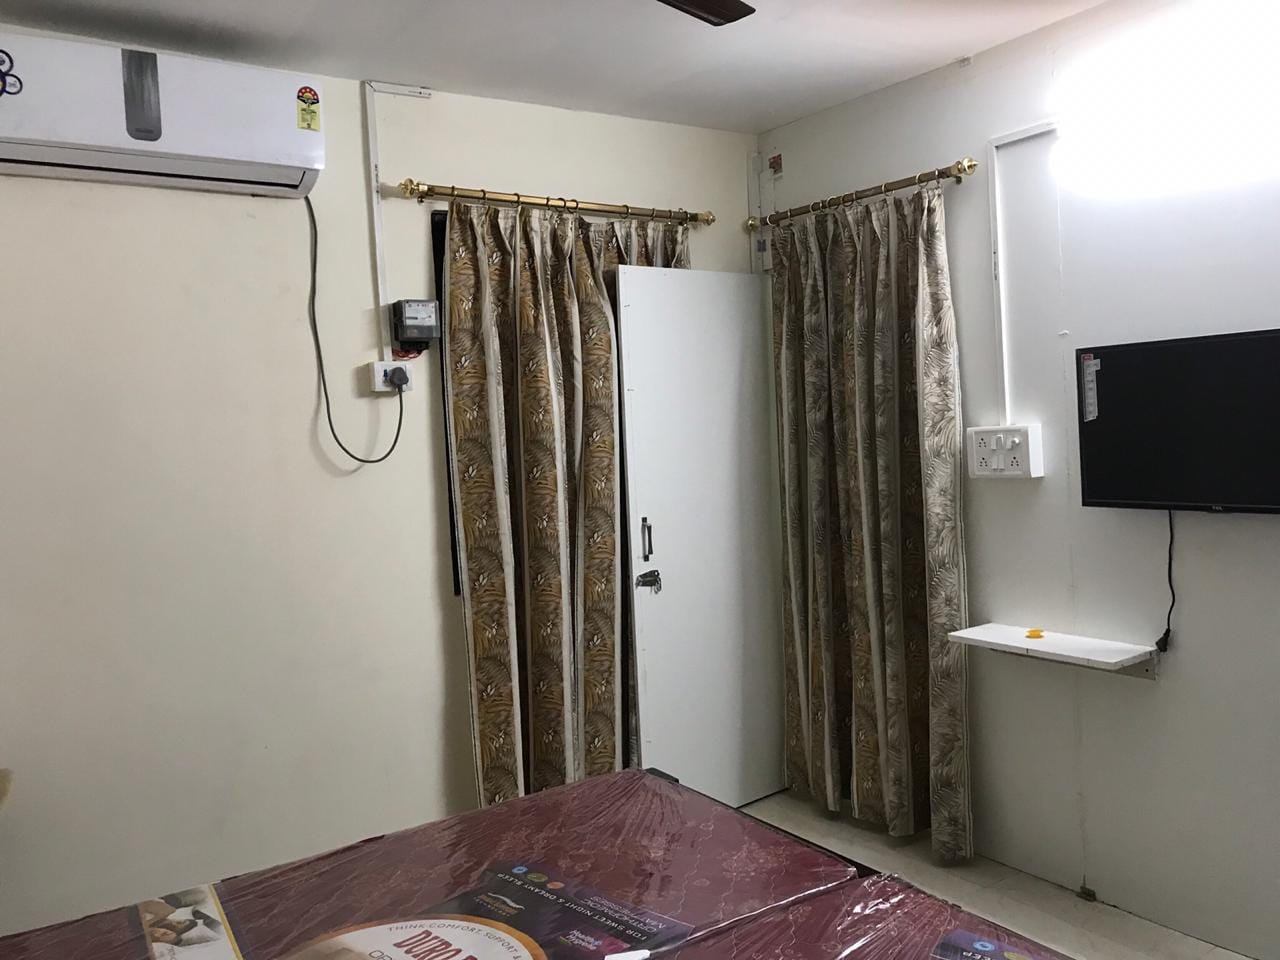 2 Bed/ 2 Bath Apartment/ Flat, Furnished for rent @ Kailash Hills, East of Kailash, South Delhi